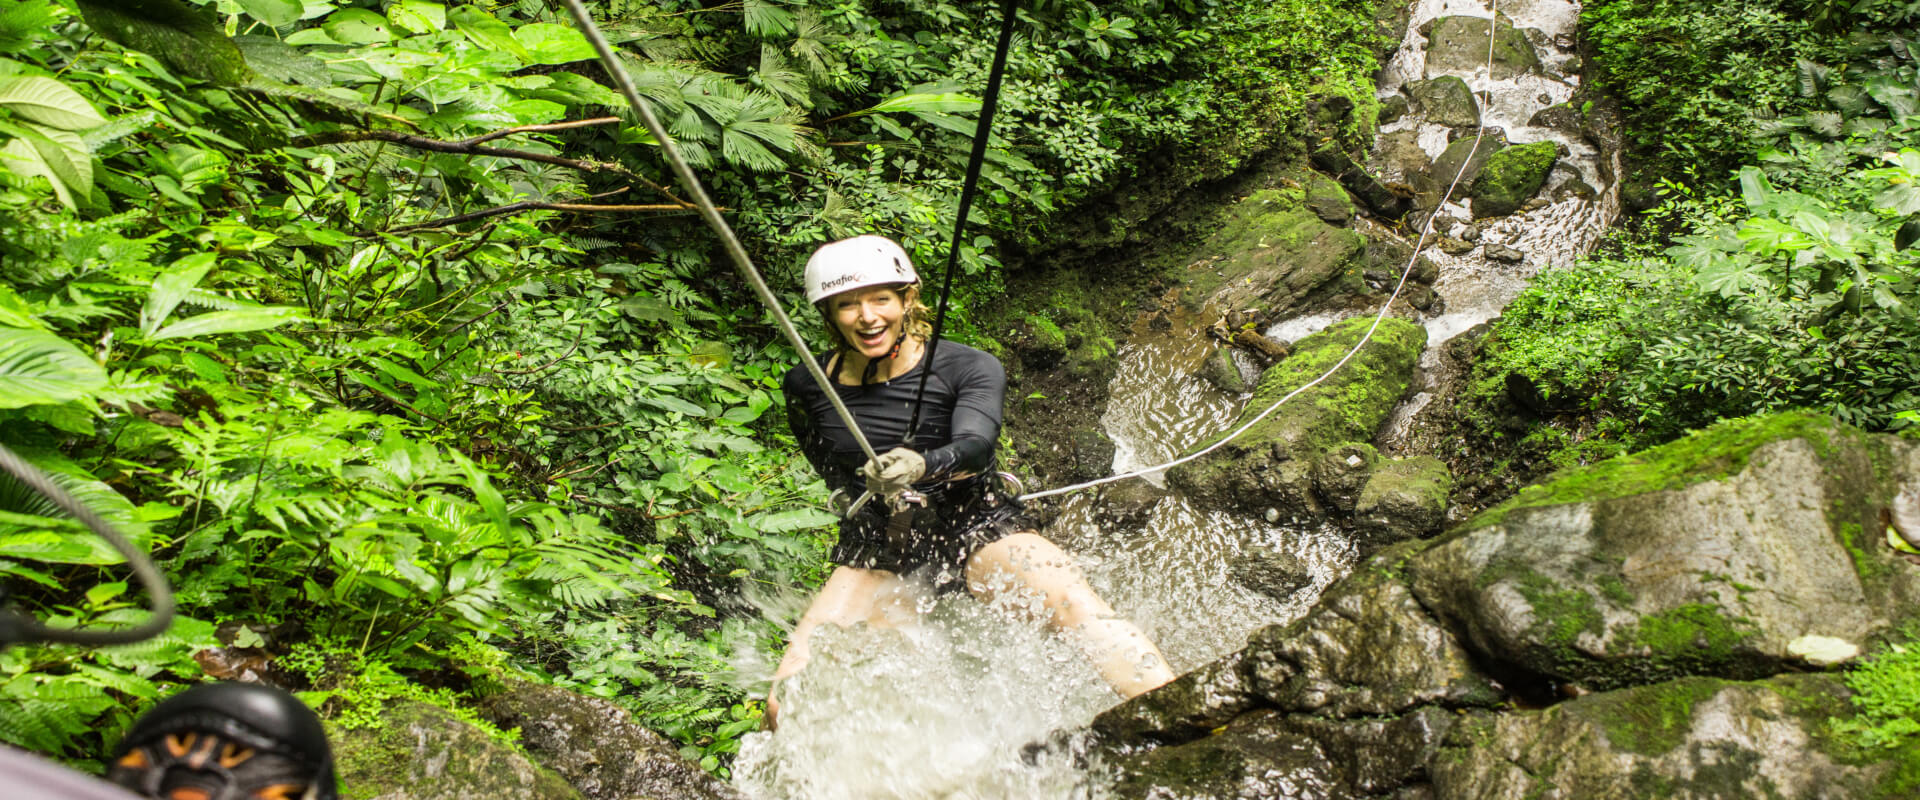 Canyoning in the Lost Canyon | Costa Rica Jade Tours